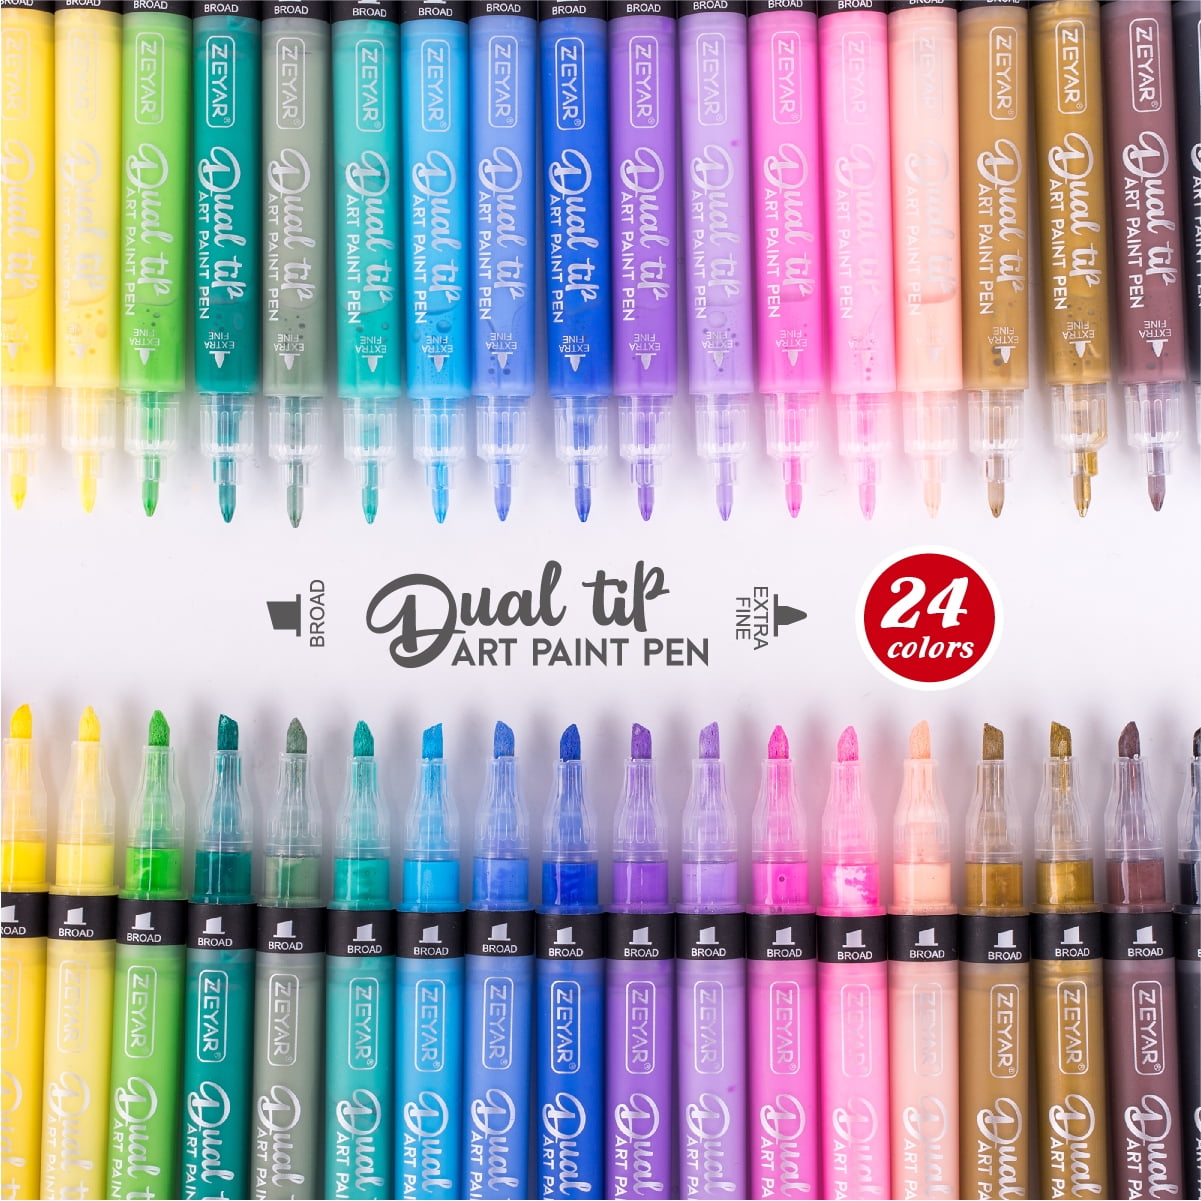 ZEYAR Dual Tip Acrylic Paint Pen Metallic Colors, Board and Extra Fine  Tips, Patented Product, AP Certified, Waterproof Ink, Works on Rock, Wood,  Glass, Metal, Ceramic and More (12 Metallic Colors) 